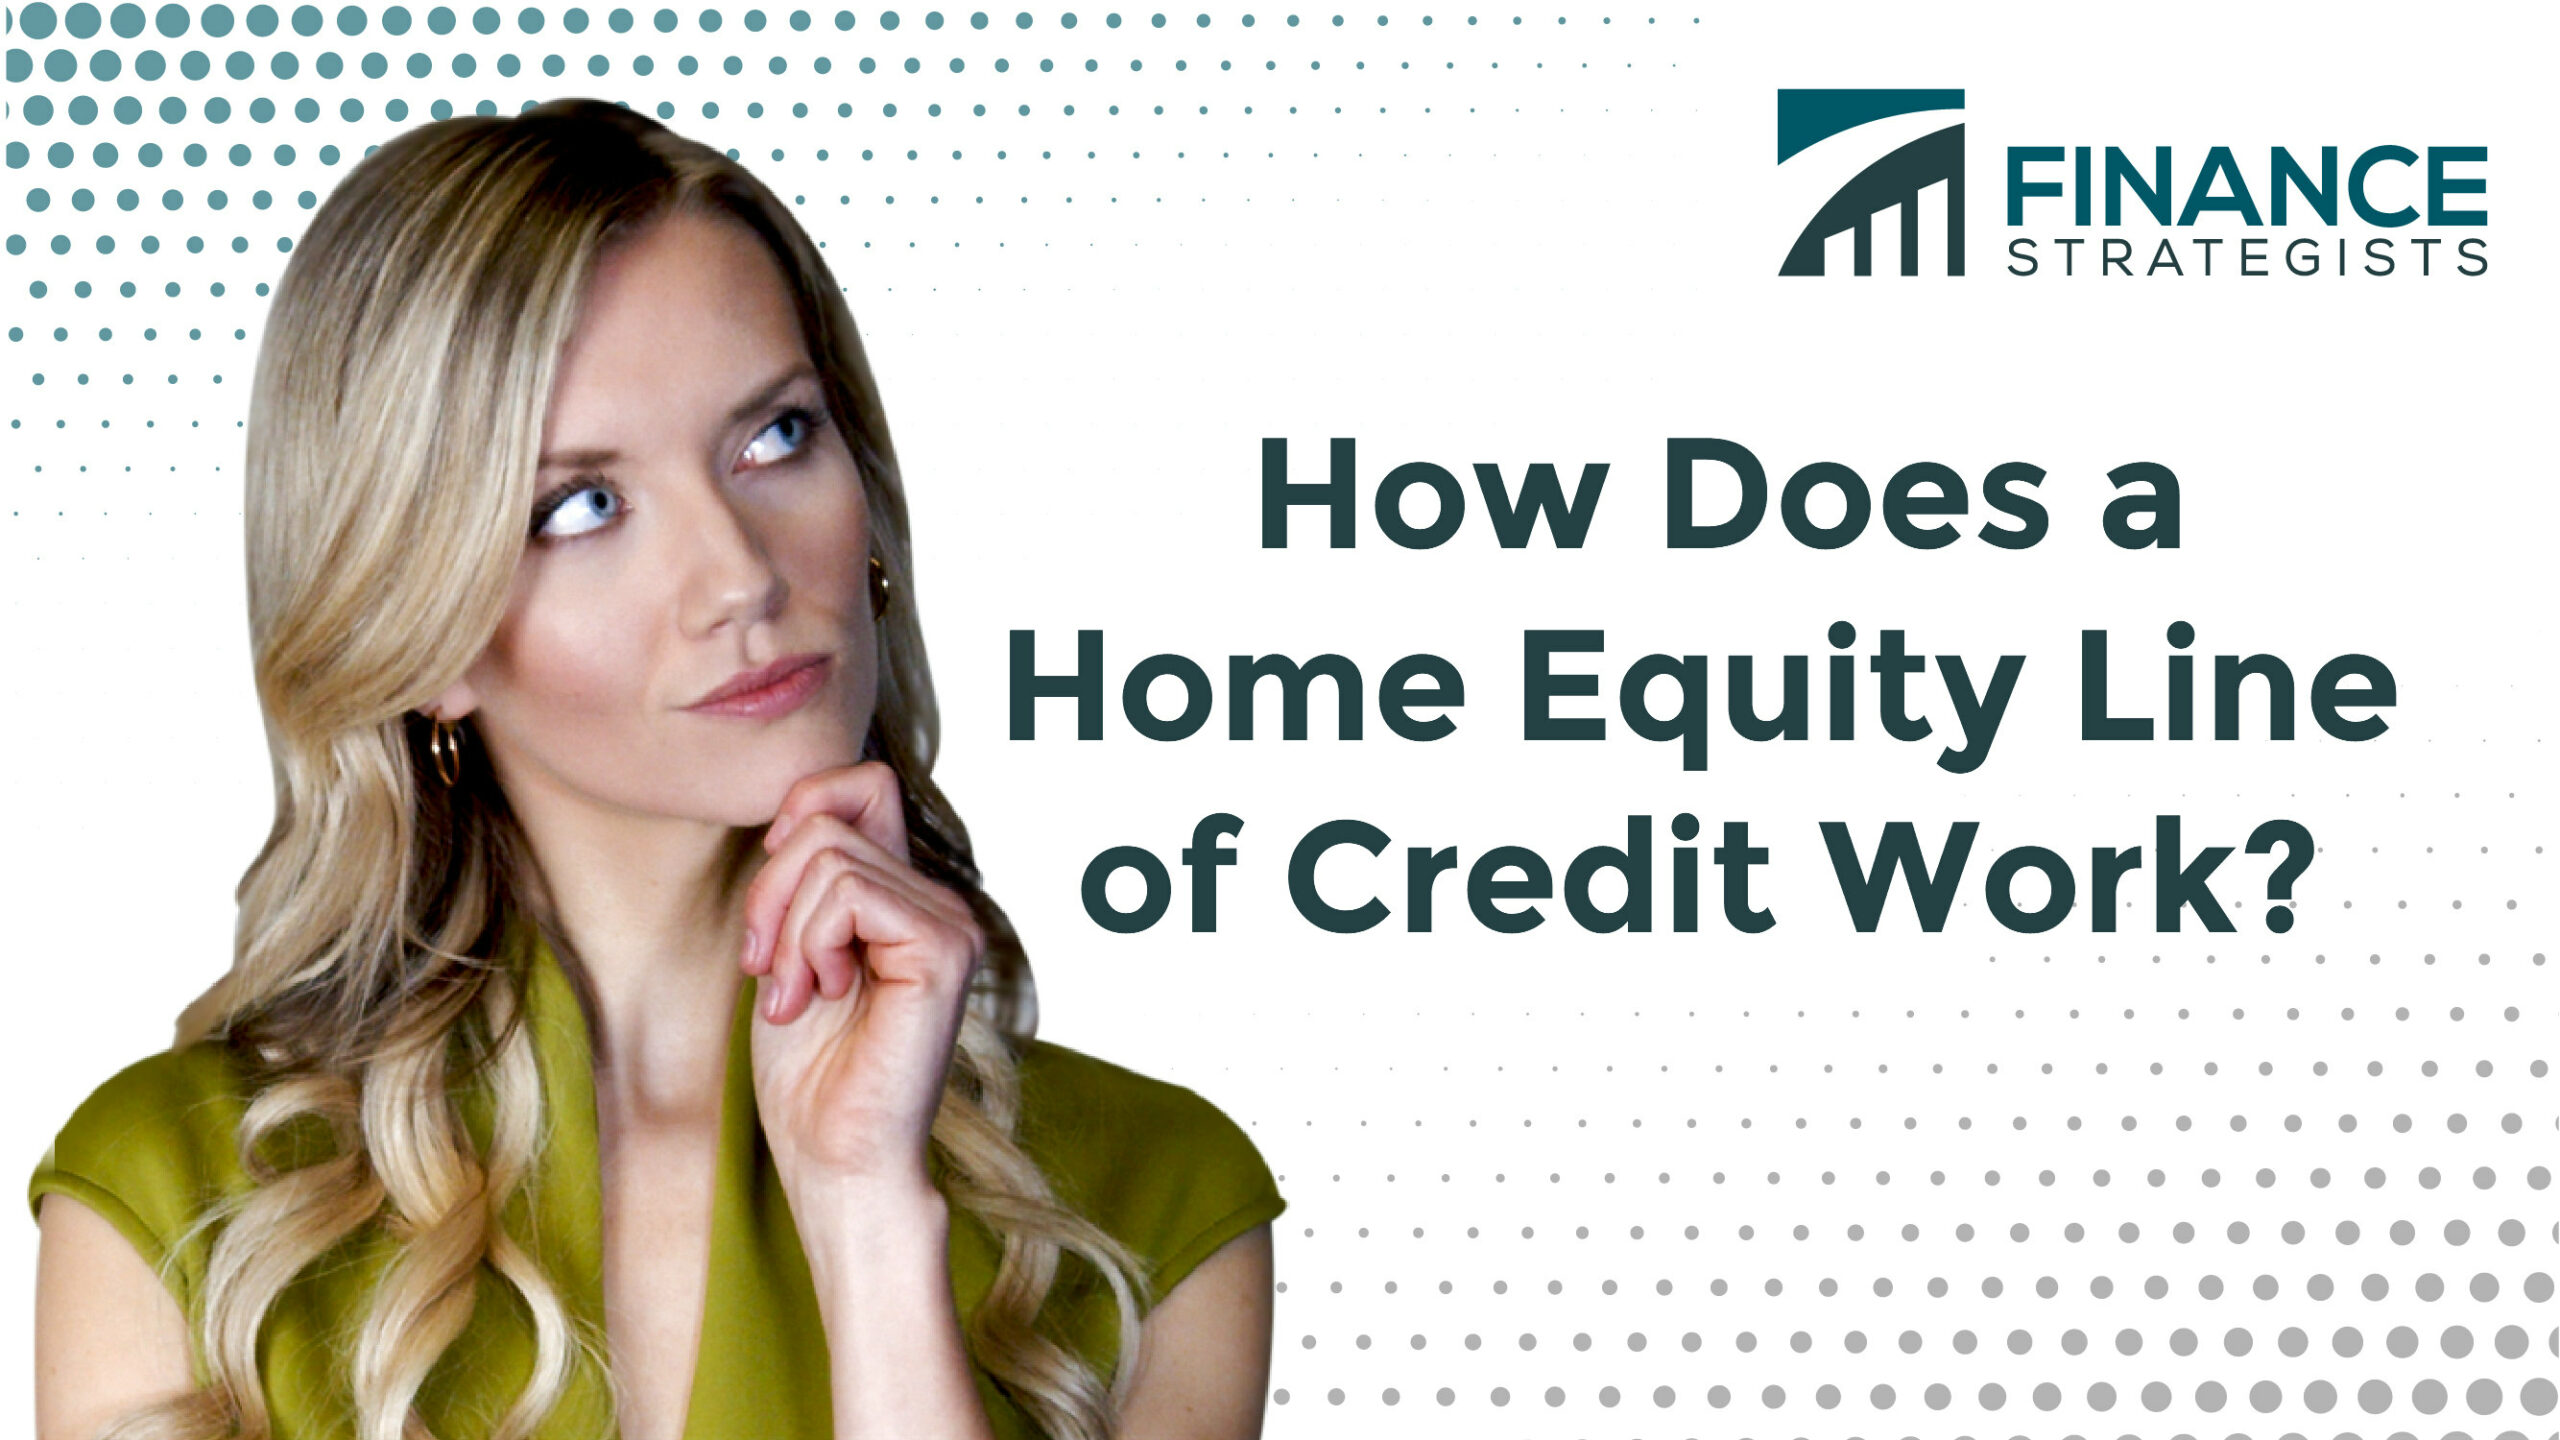 how-does-a-home-equity-line-of-credit-work-finance-strategists